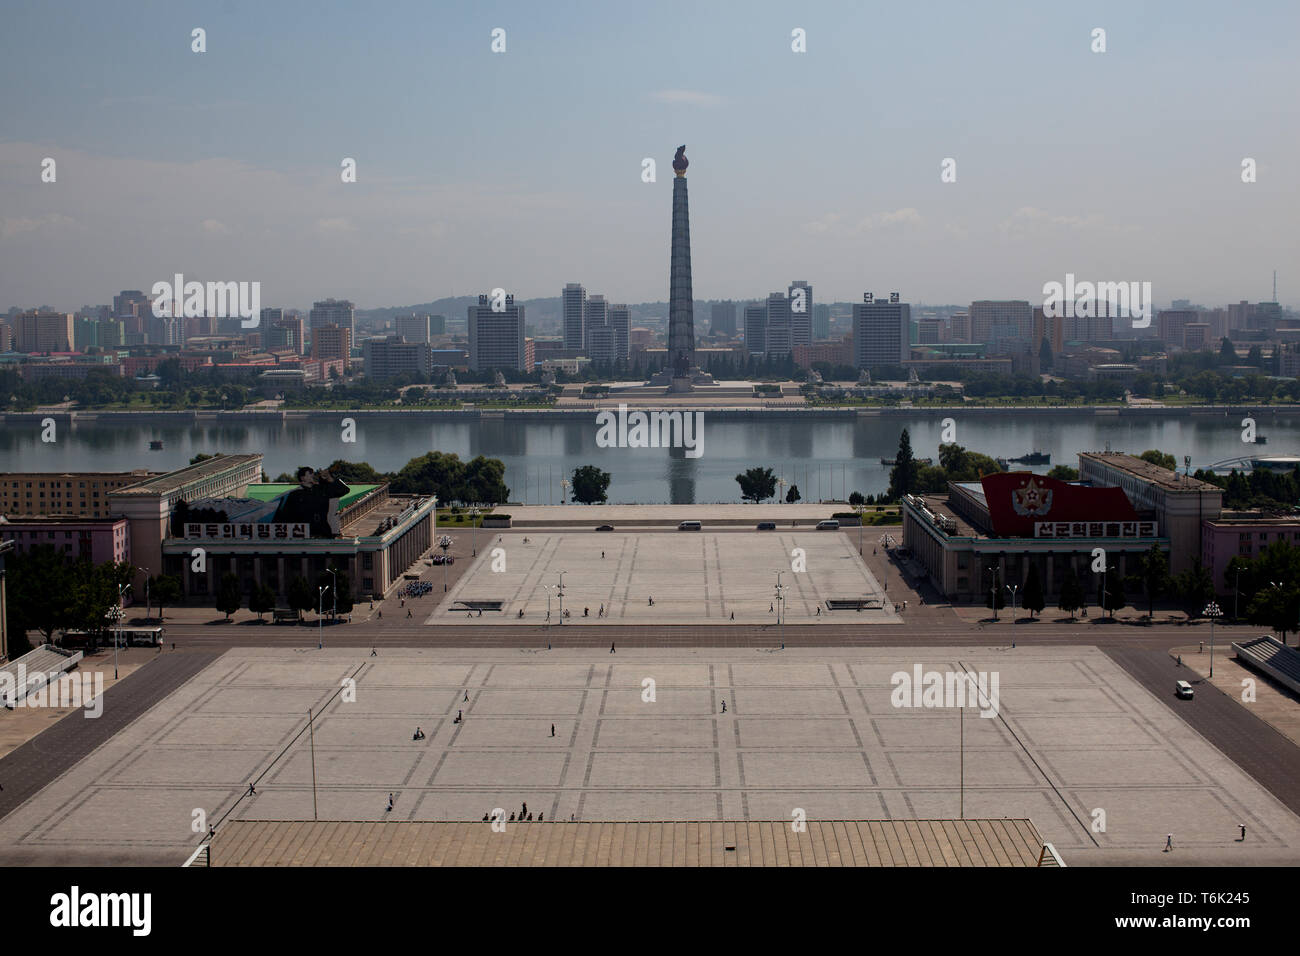 The Juche Idea Tower is seen across the Taedong River beyond Kim Il Sung Square in Pyongyang. Stock Photo